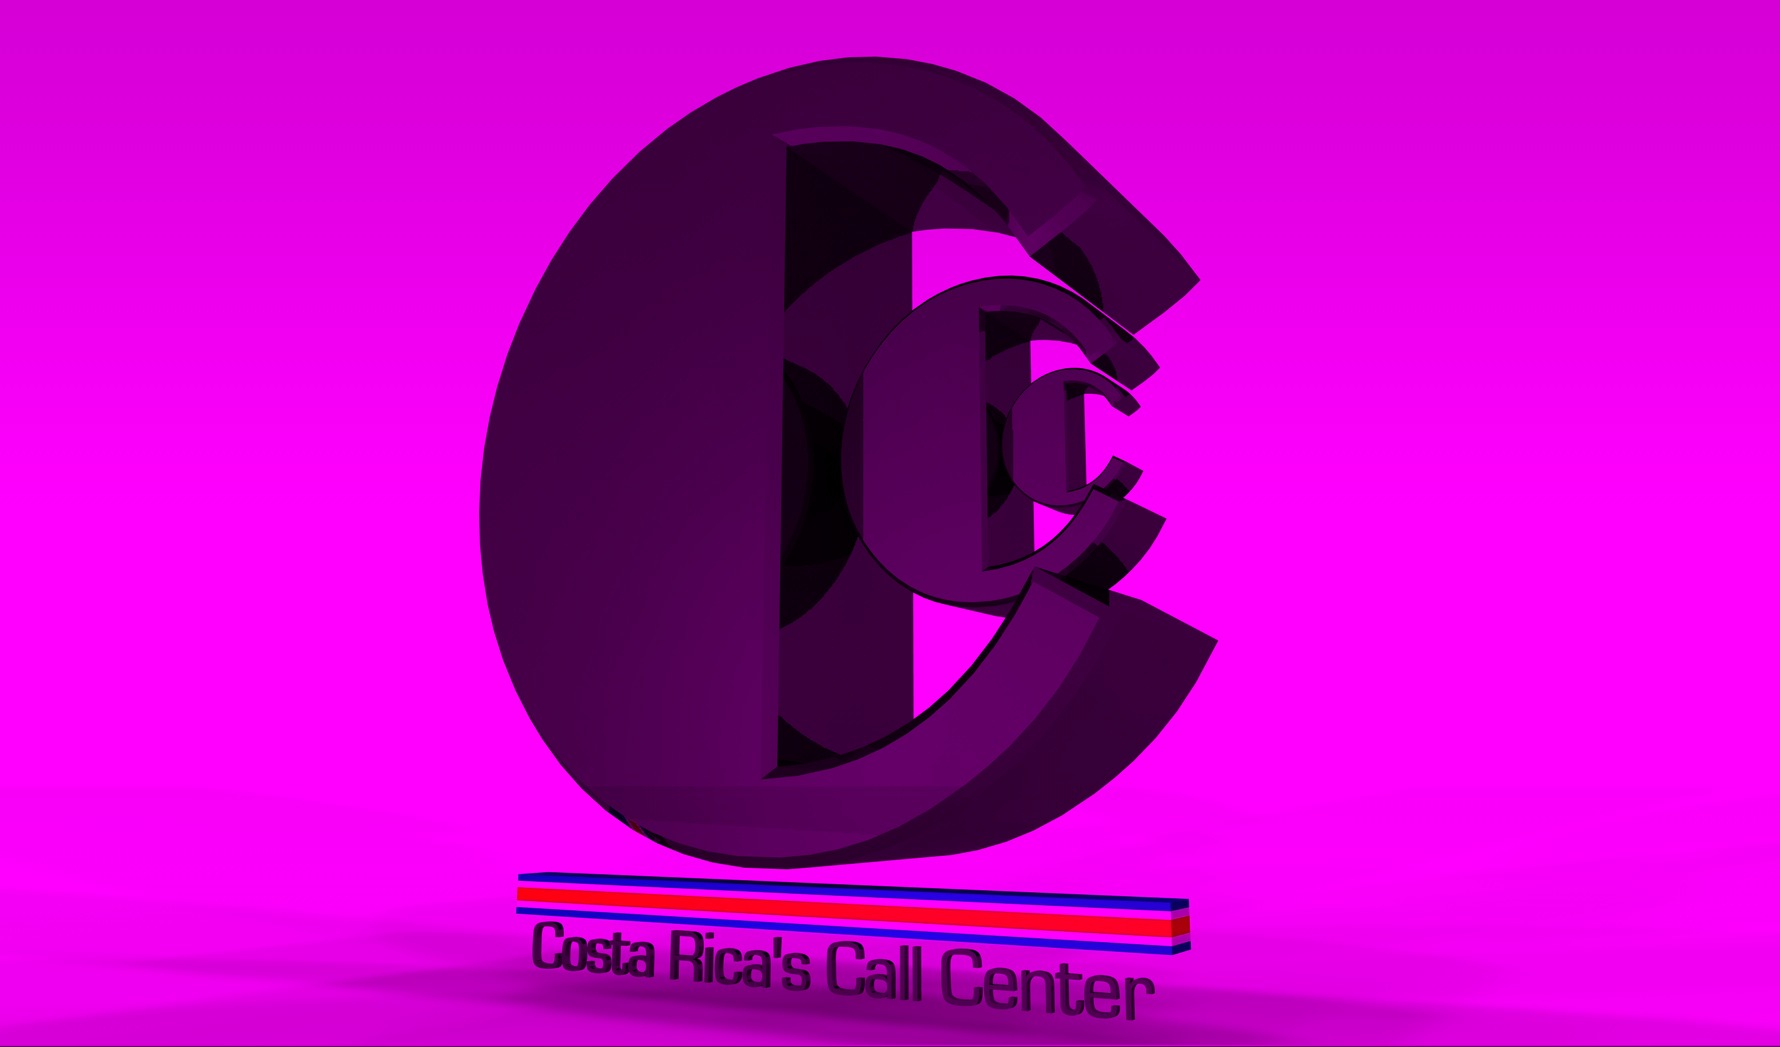 COLD CALL CONTACT NUMBER COSTA RICA.jpg  by richardblank